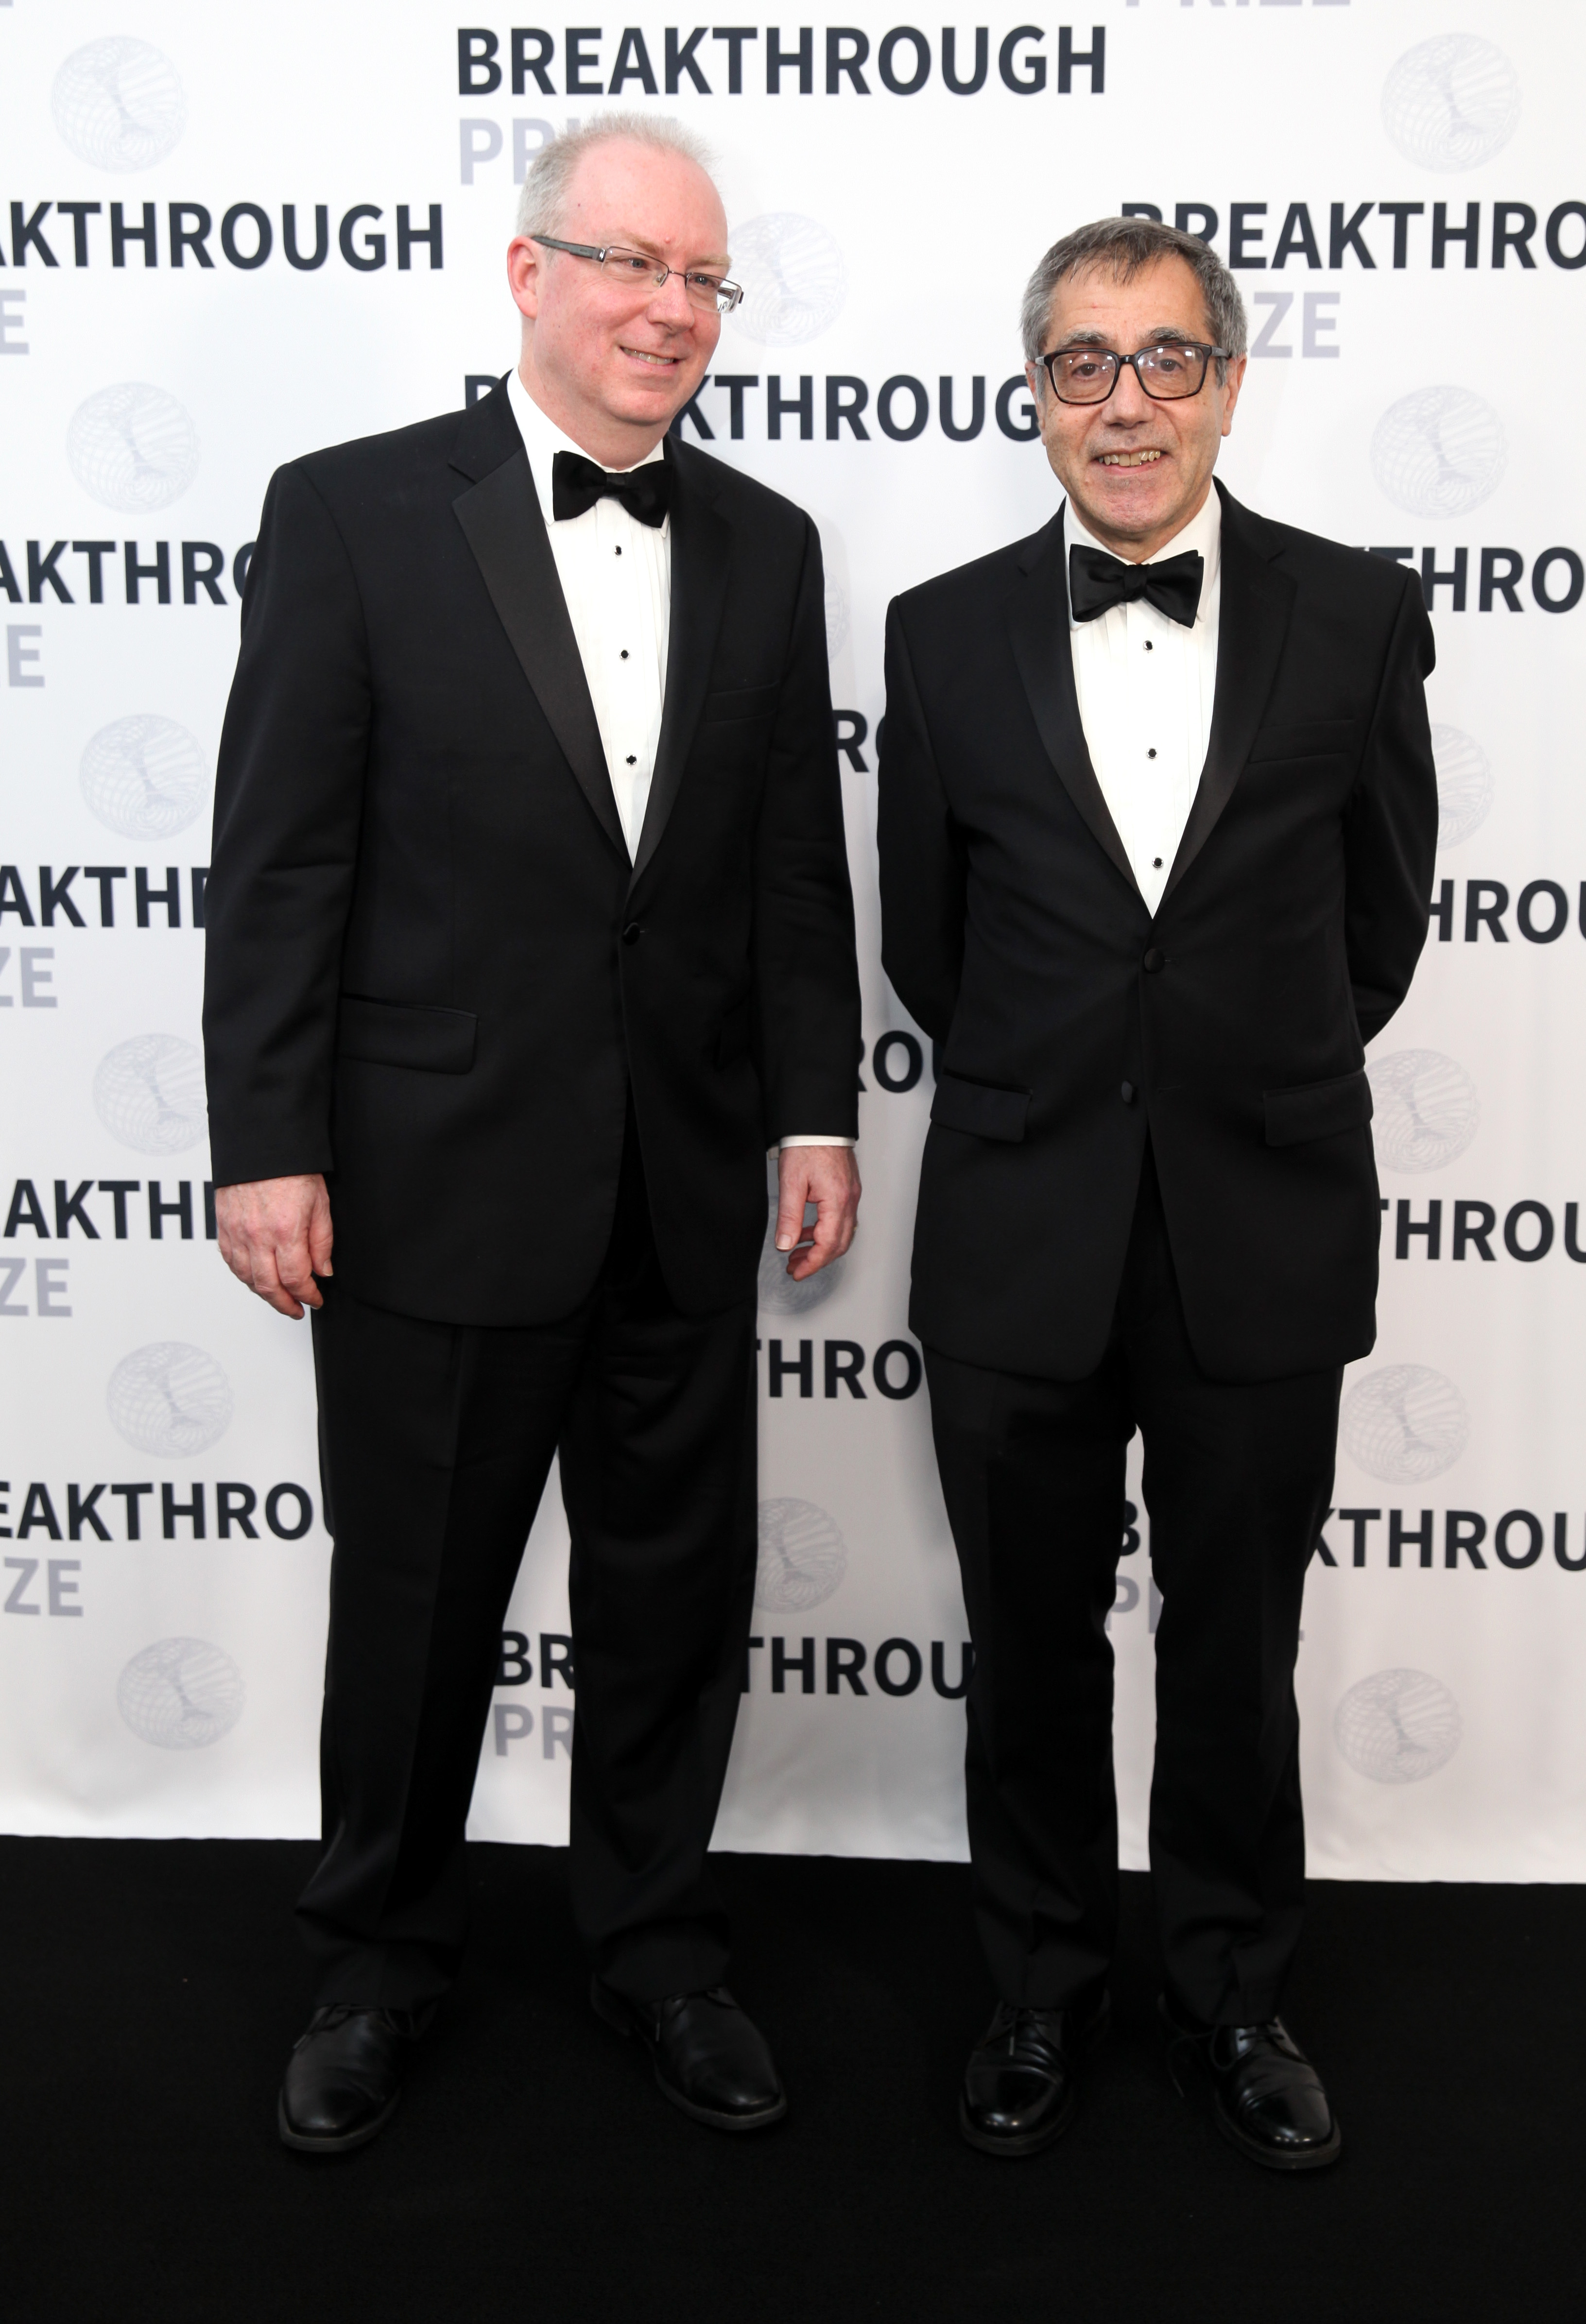 Mele and Kane at the Breakthrough Prize Award Ceremony